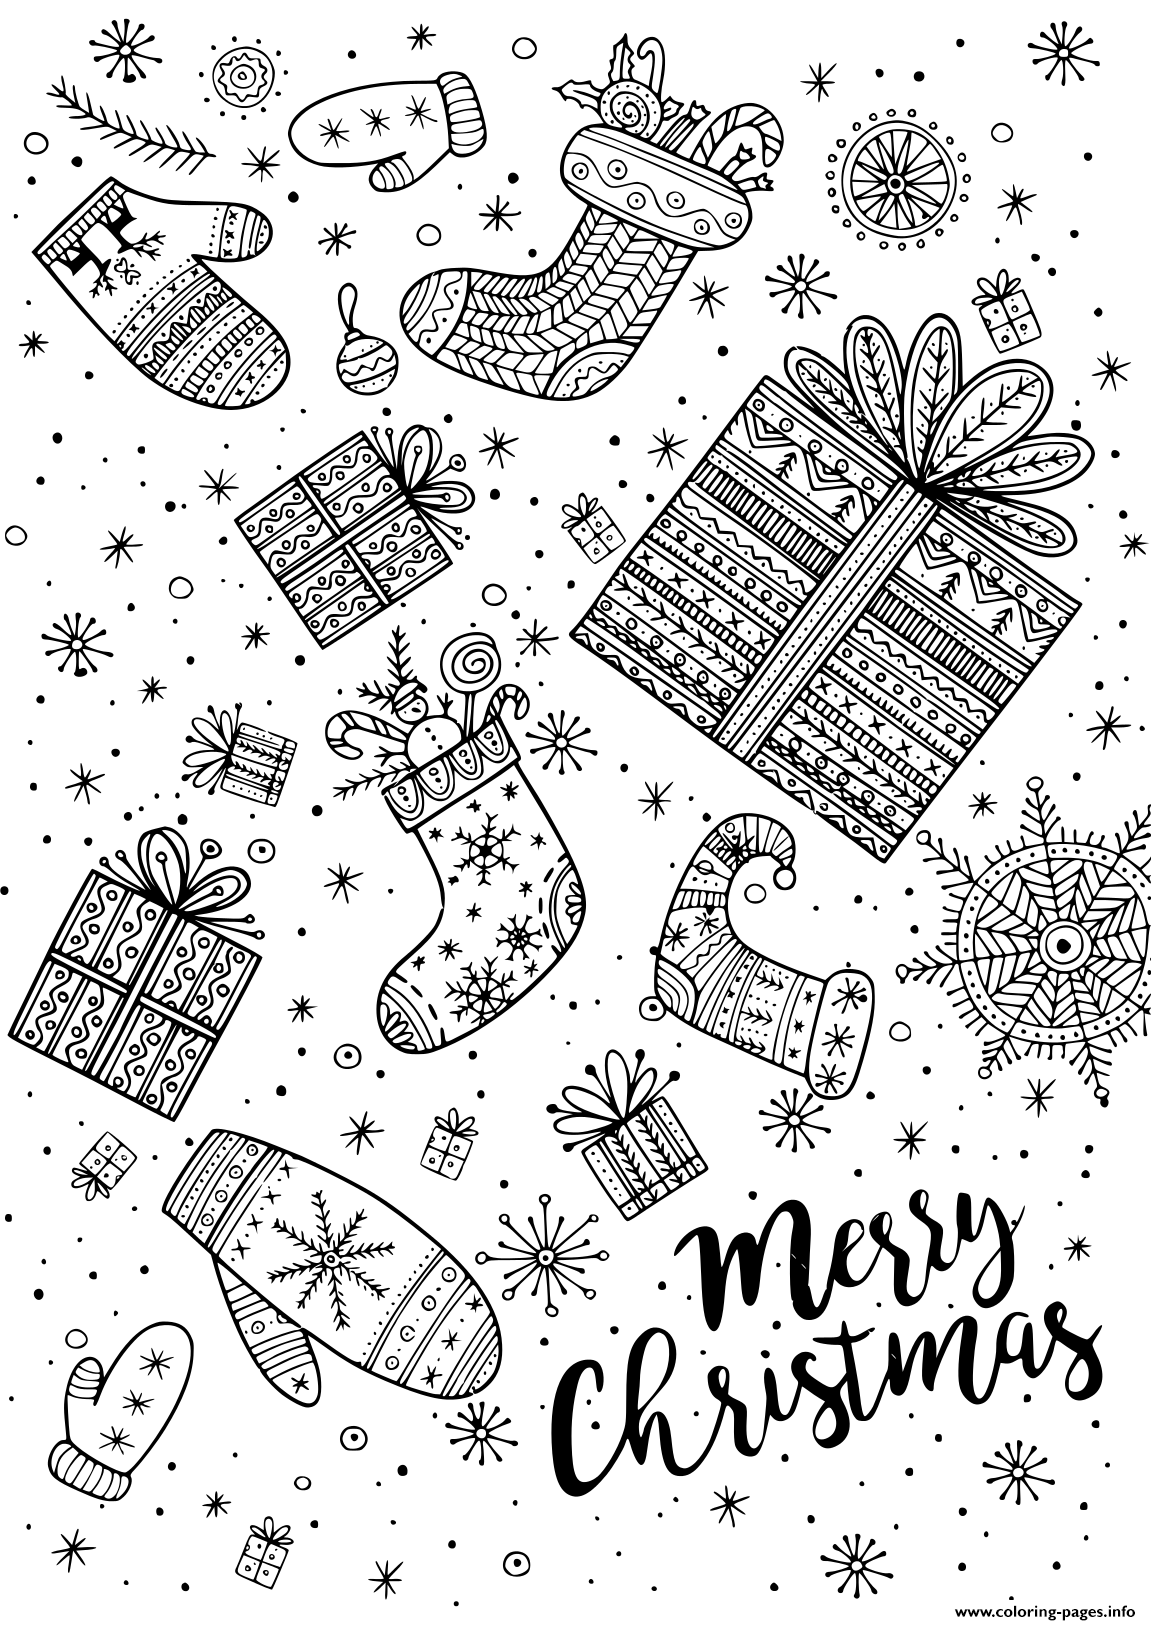 Merry Christmas Gifts And Bottom Of Christmas Adult coloring